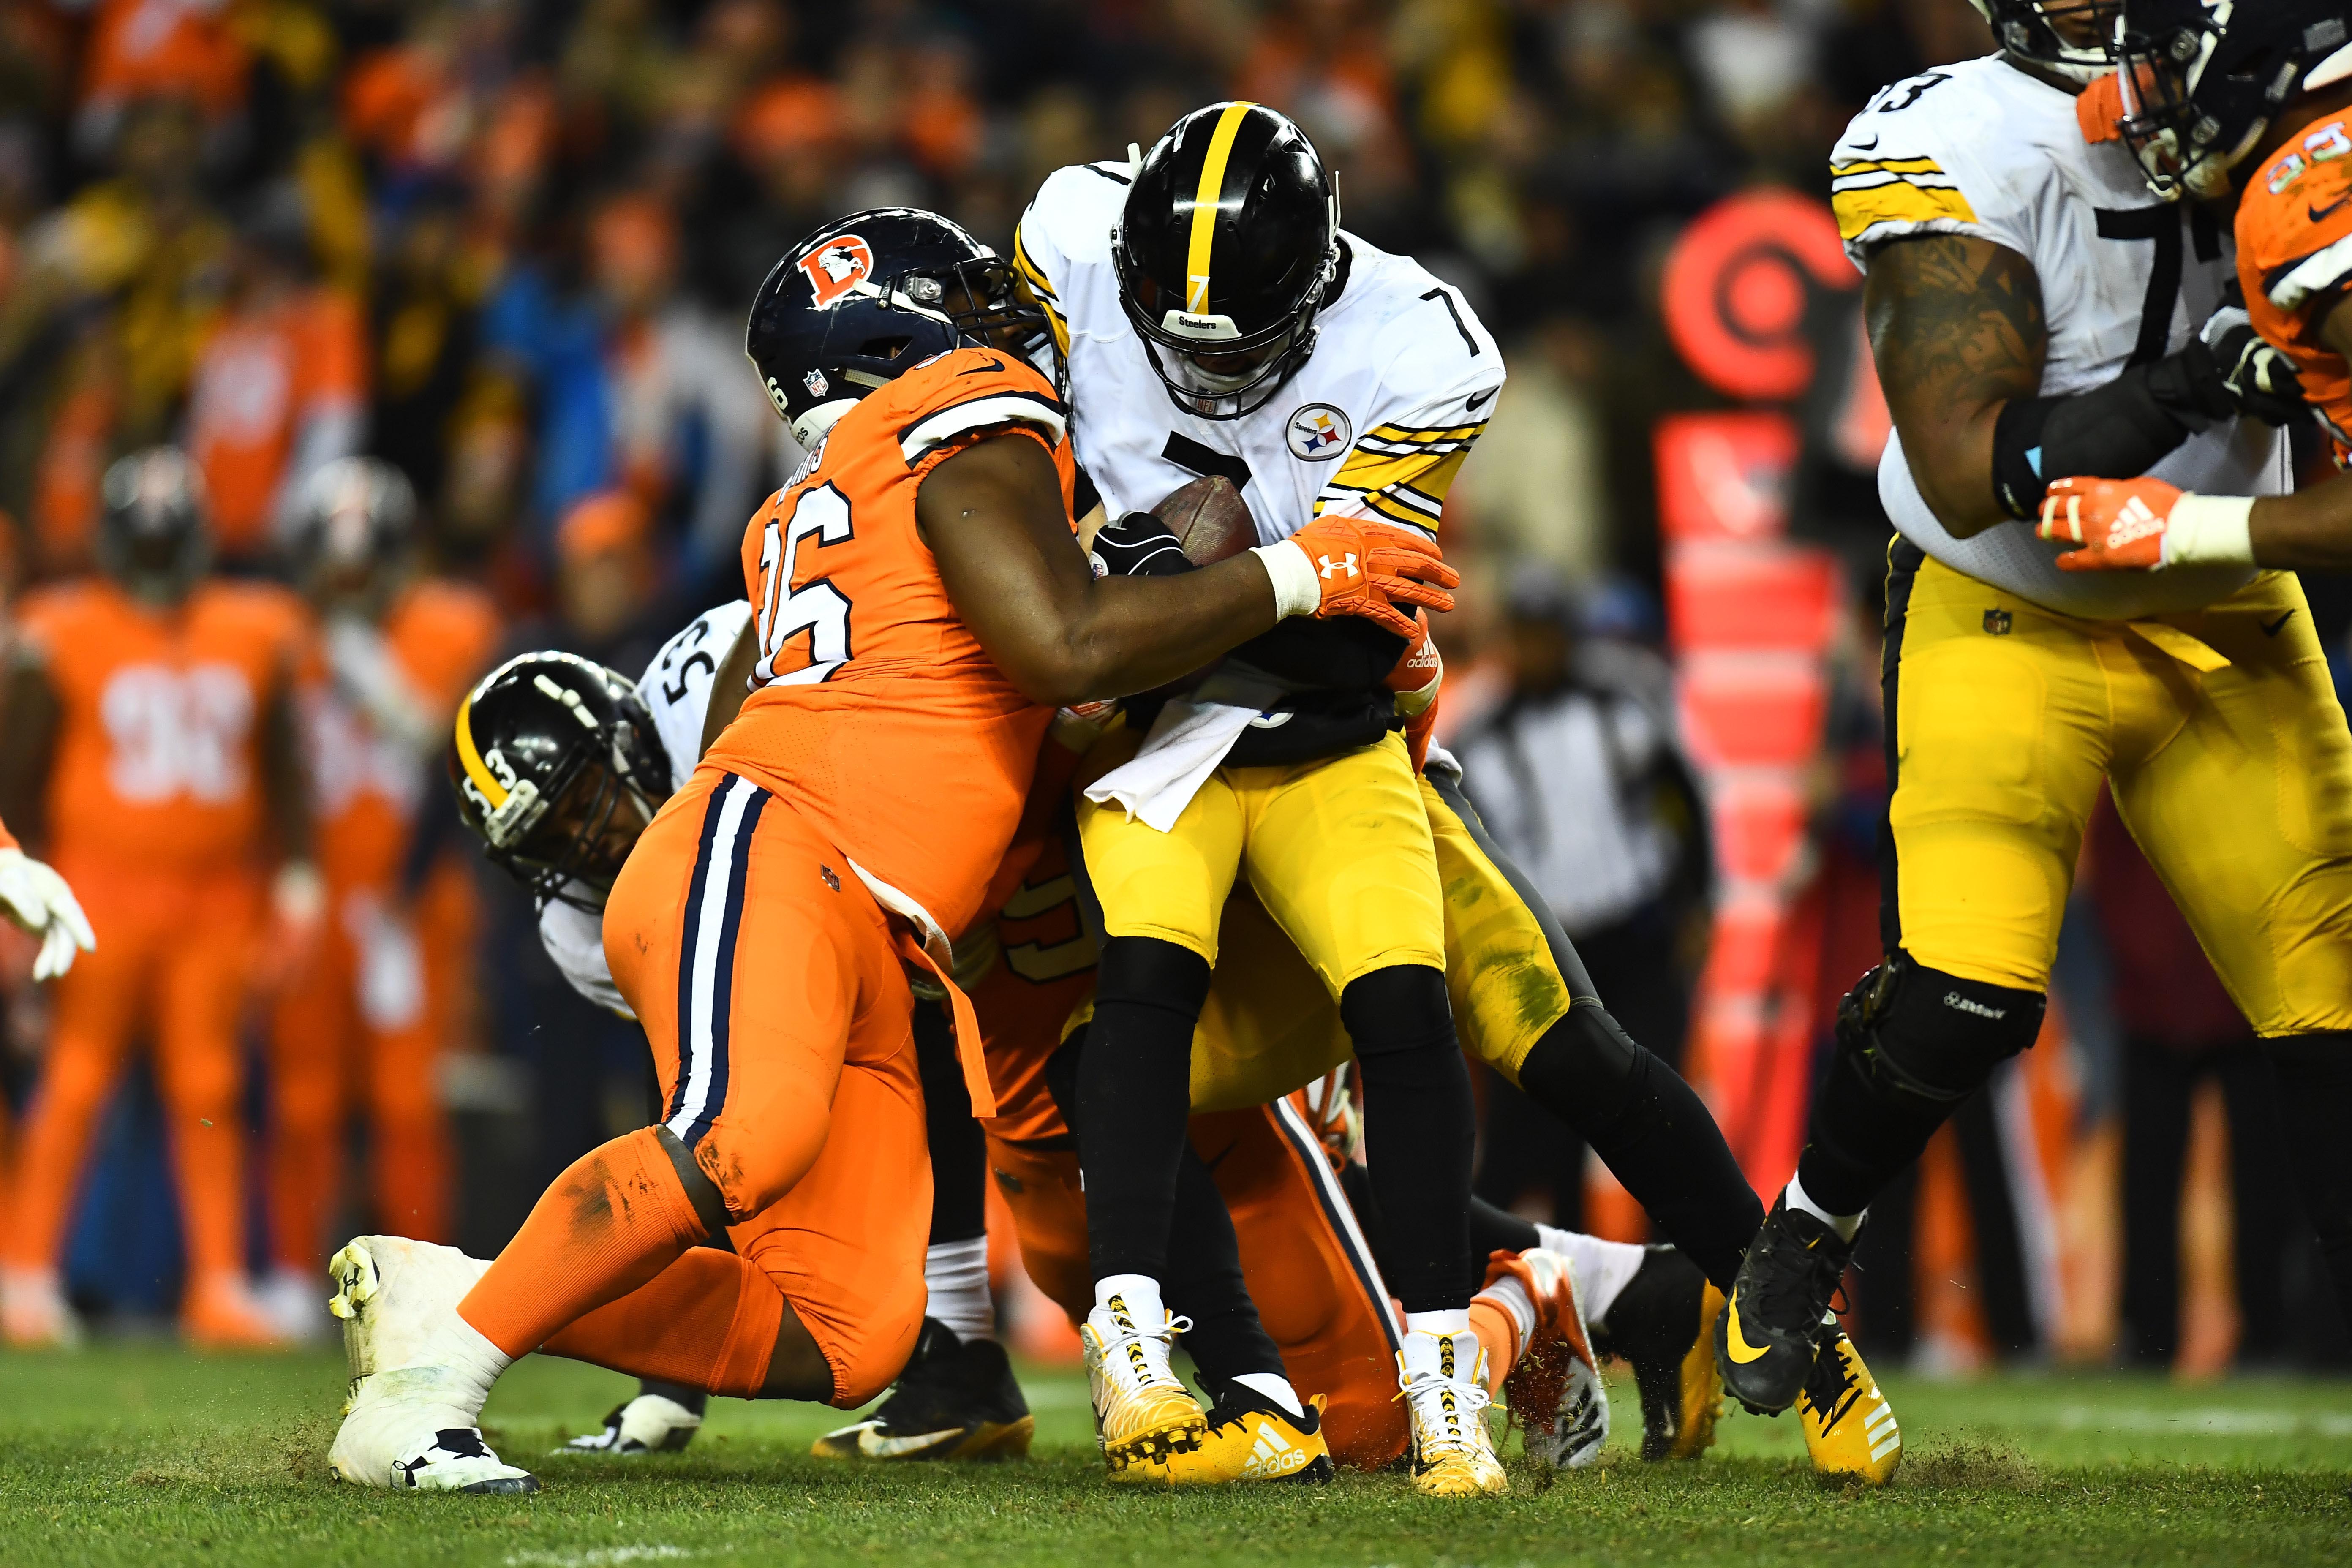 Pittsburgh Steelers quarterback Ben Roethlisberger (7) is sacked by Denver Broncos defensive end Shelby Harris (96) in the fourth quarter at Broncos Stadium at Mile High.